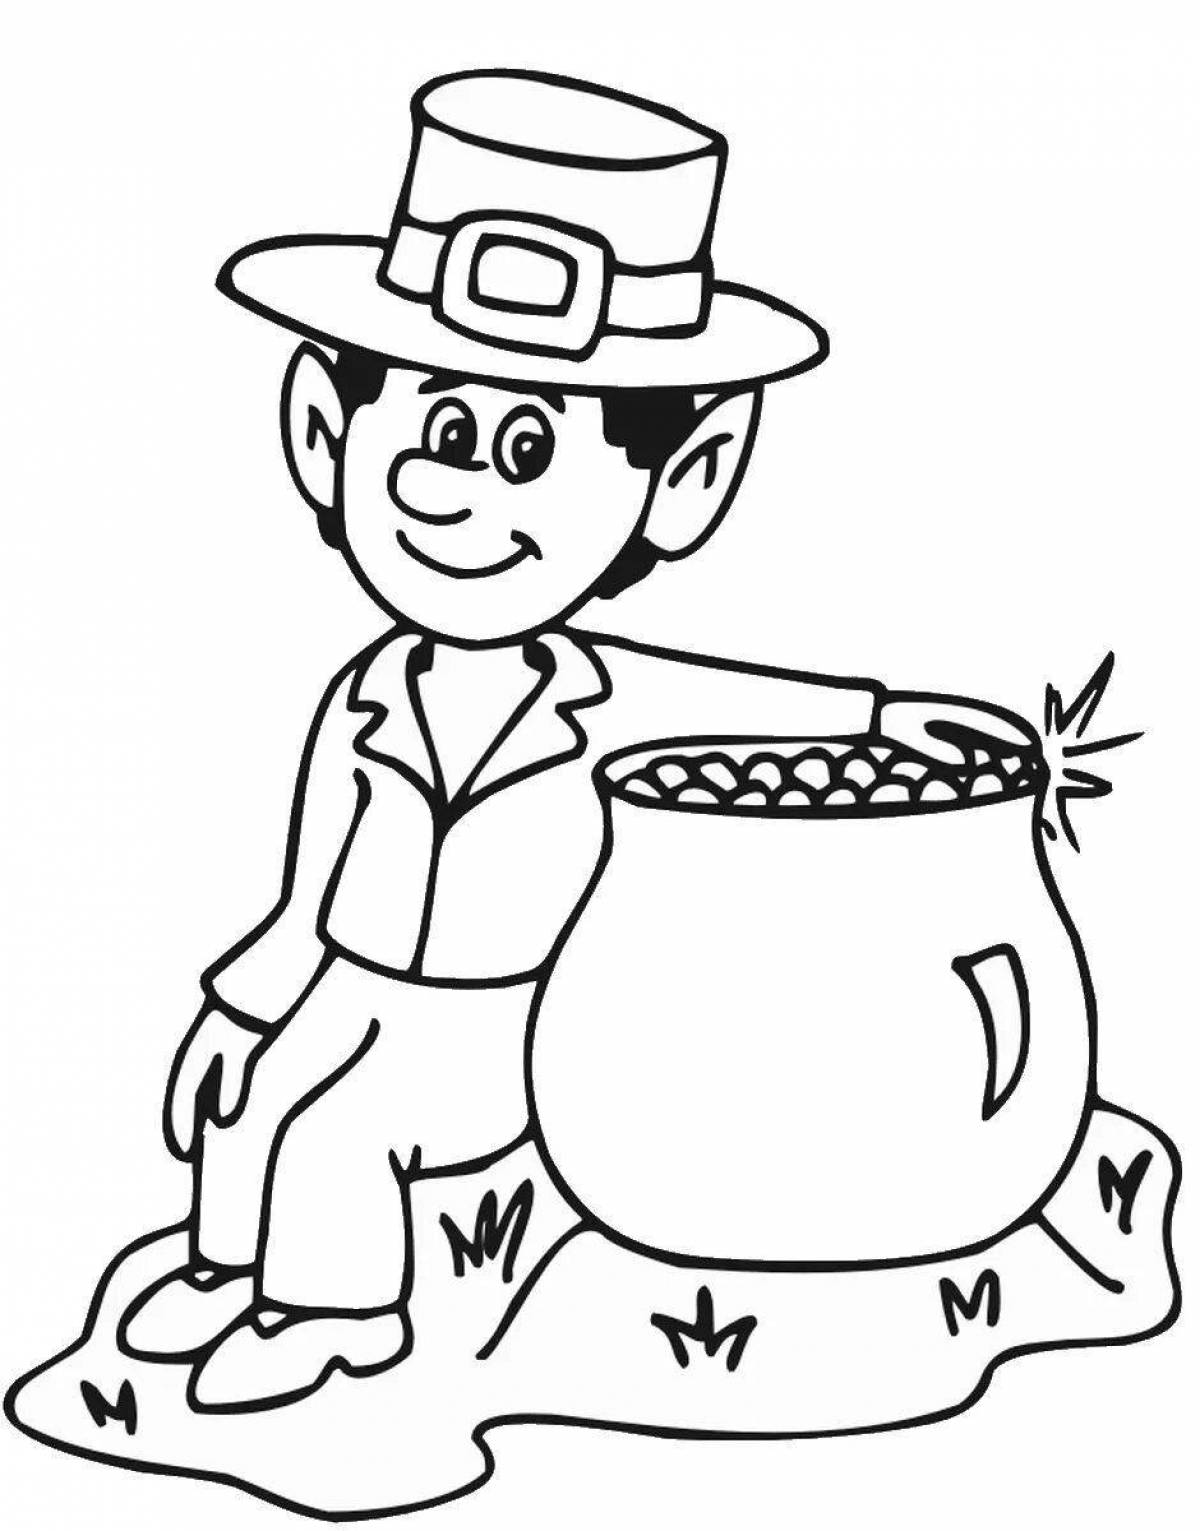 Playful potty coloring page